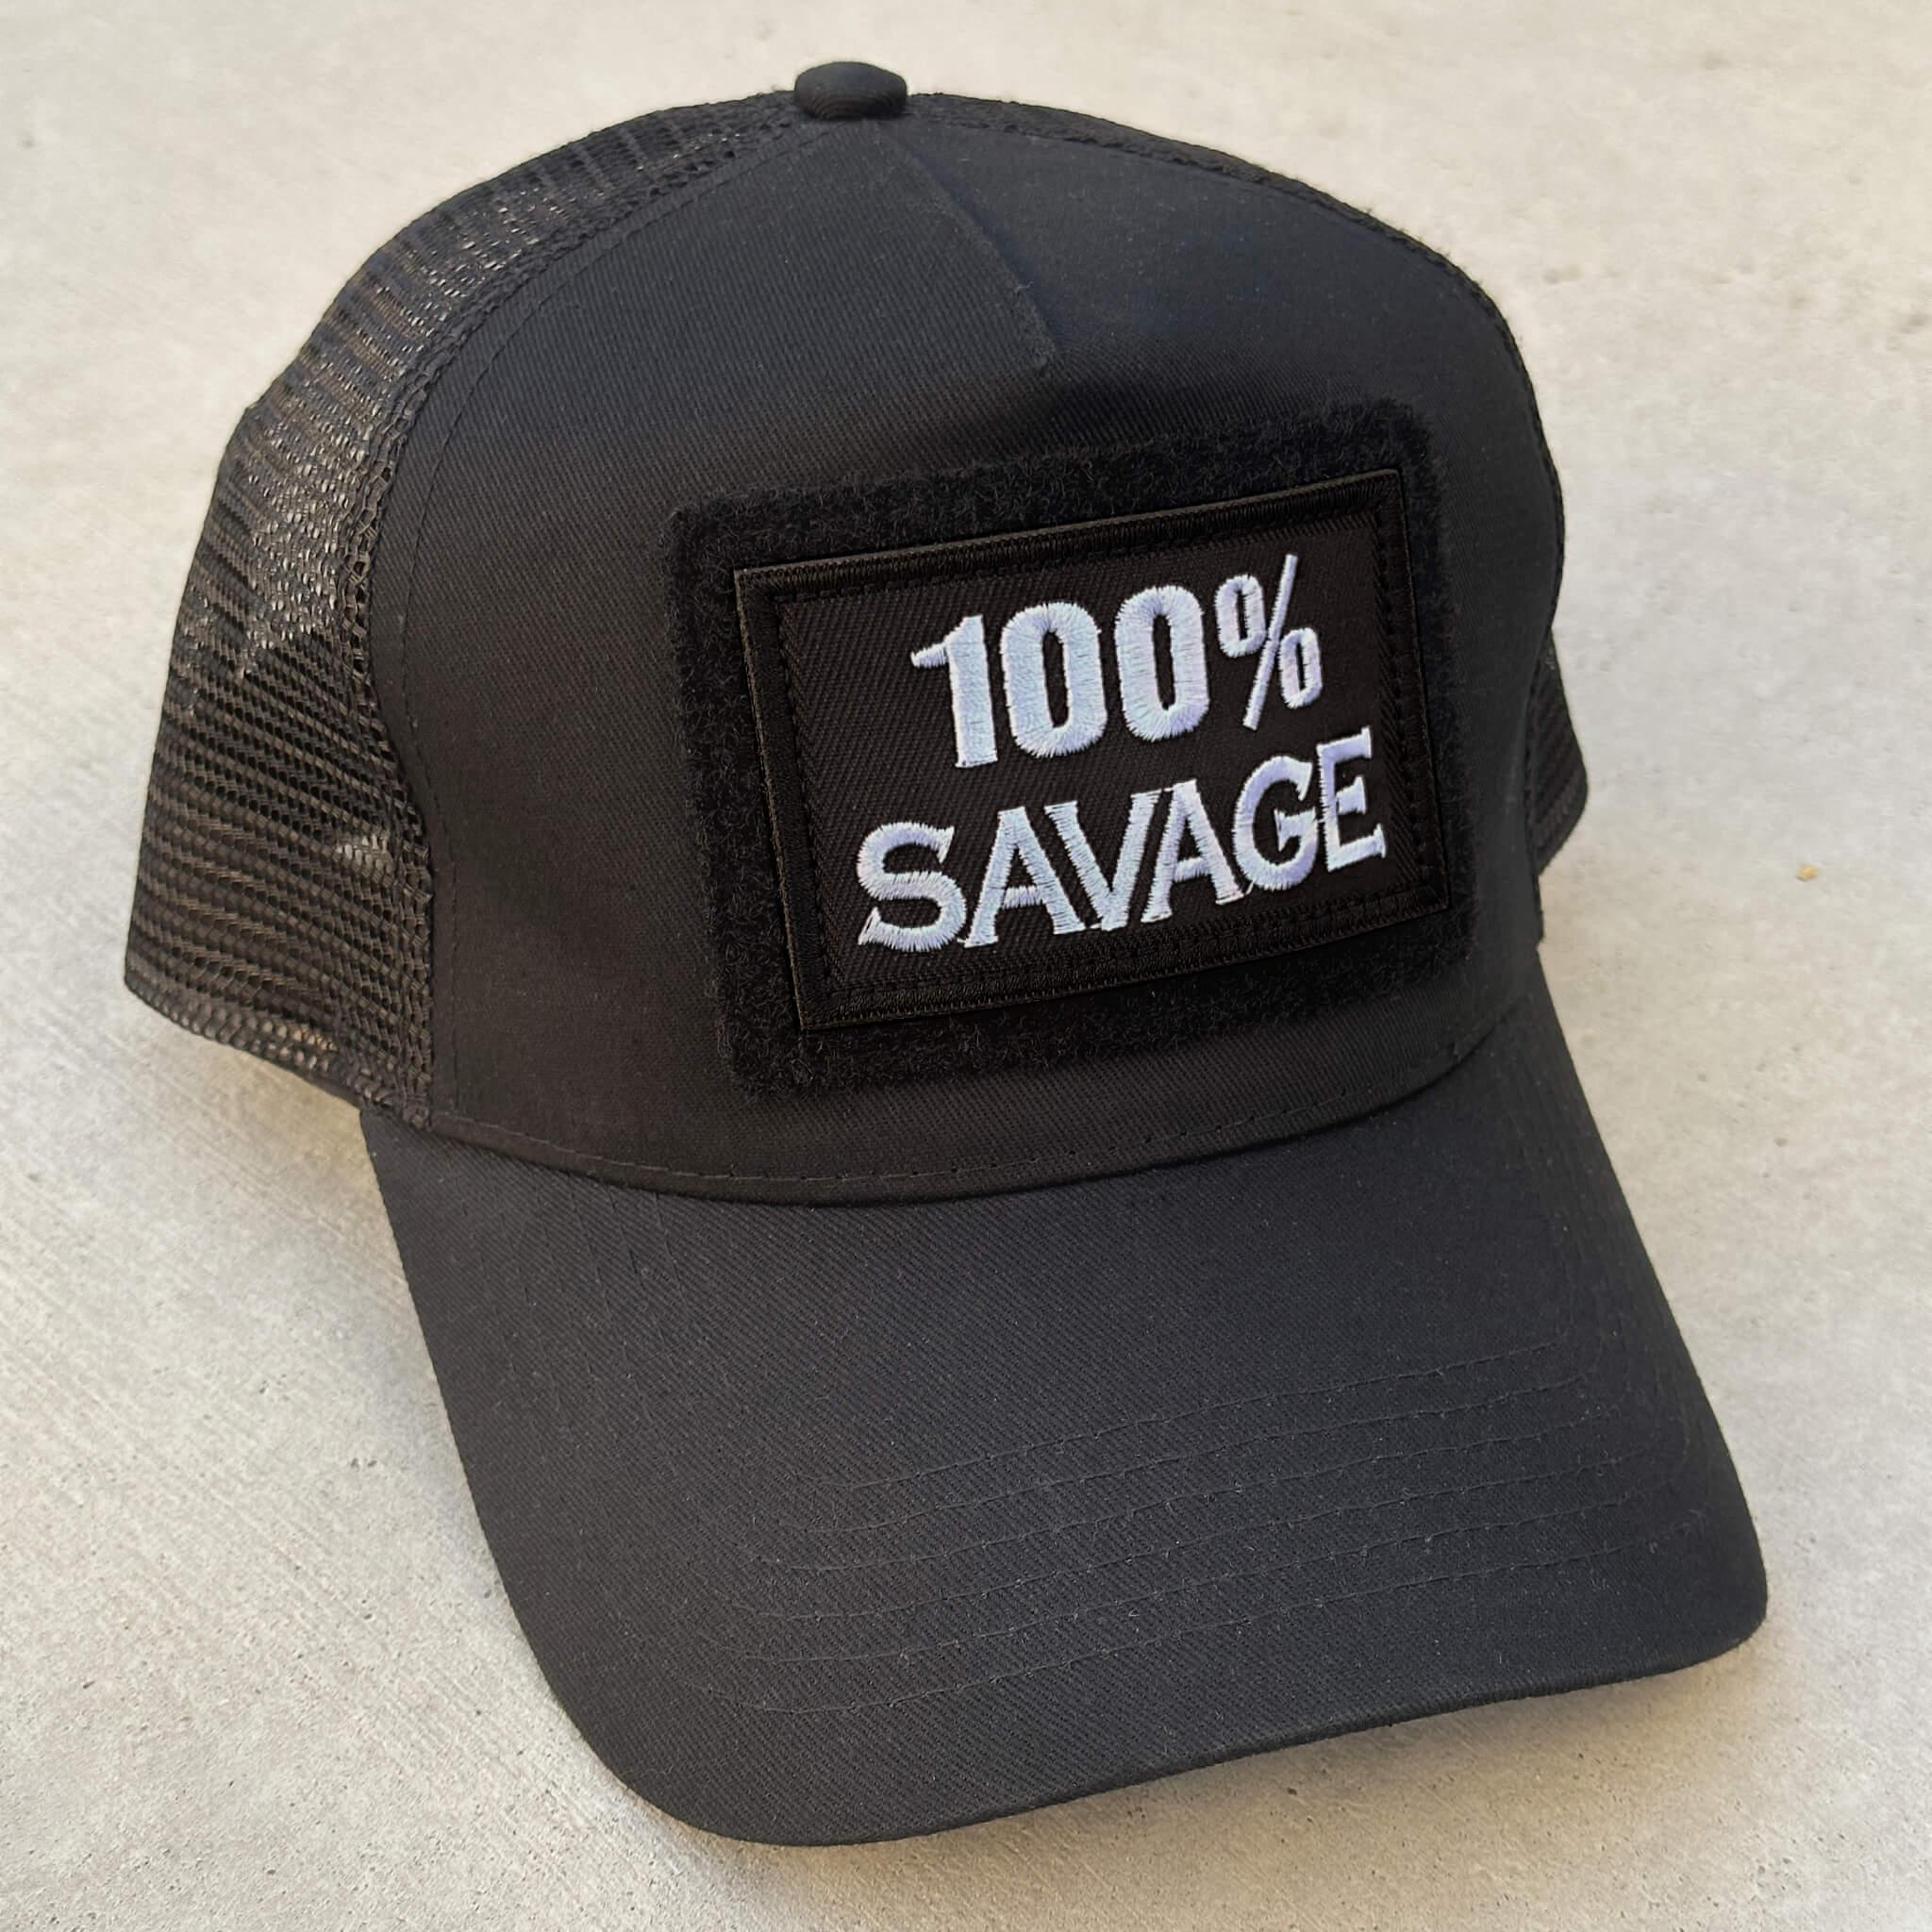 The trucker snapback cap in black colors with 100% Savage patch attached